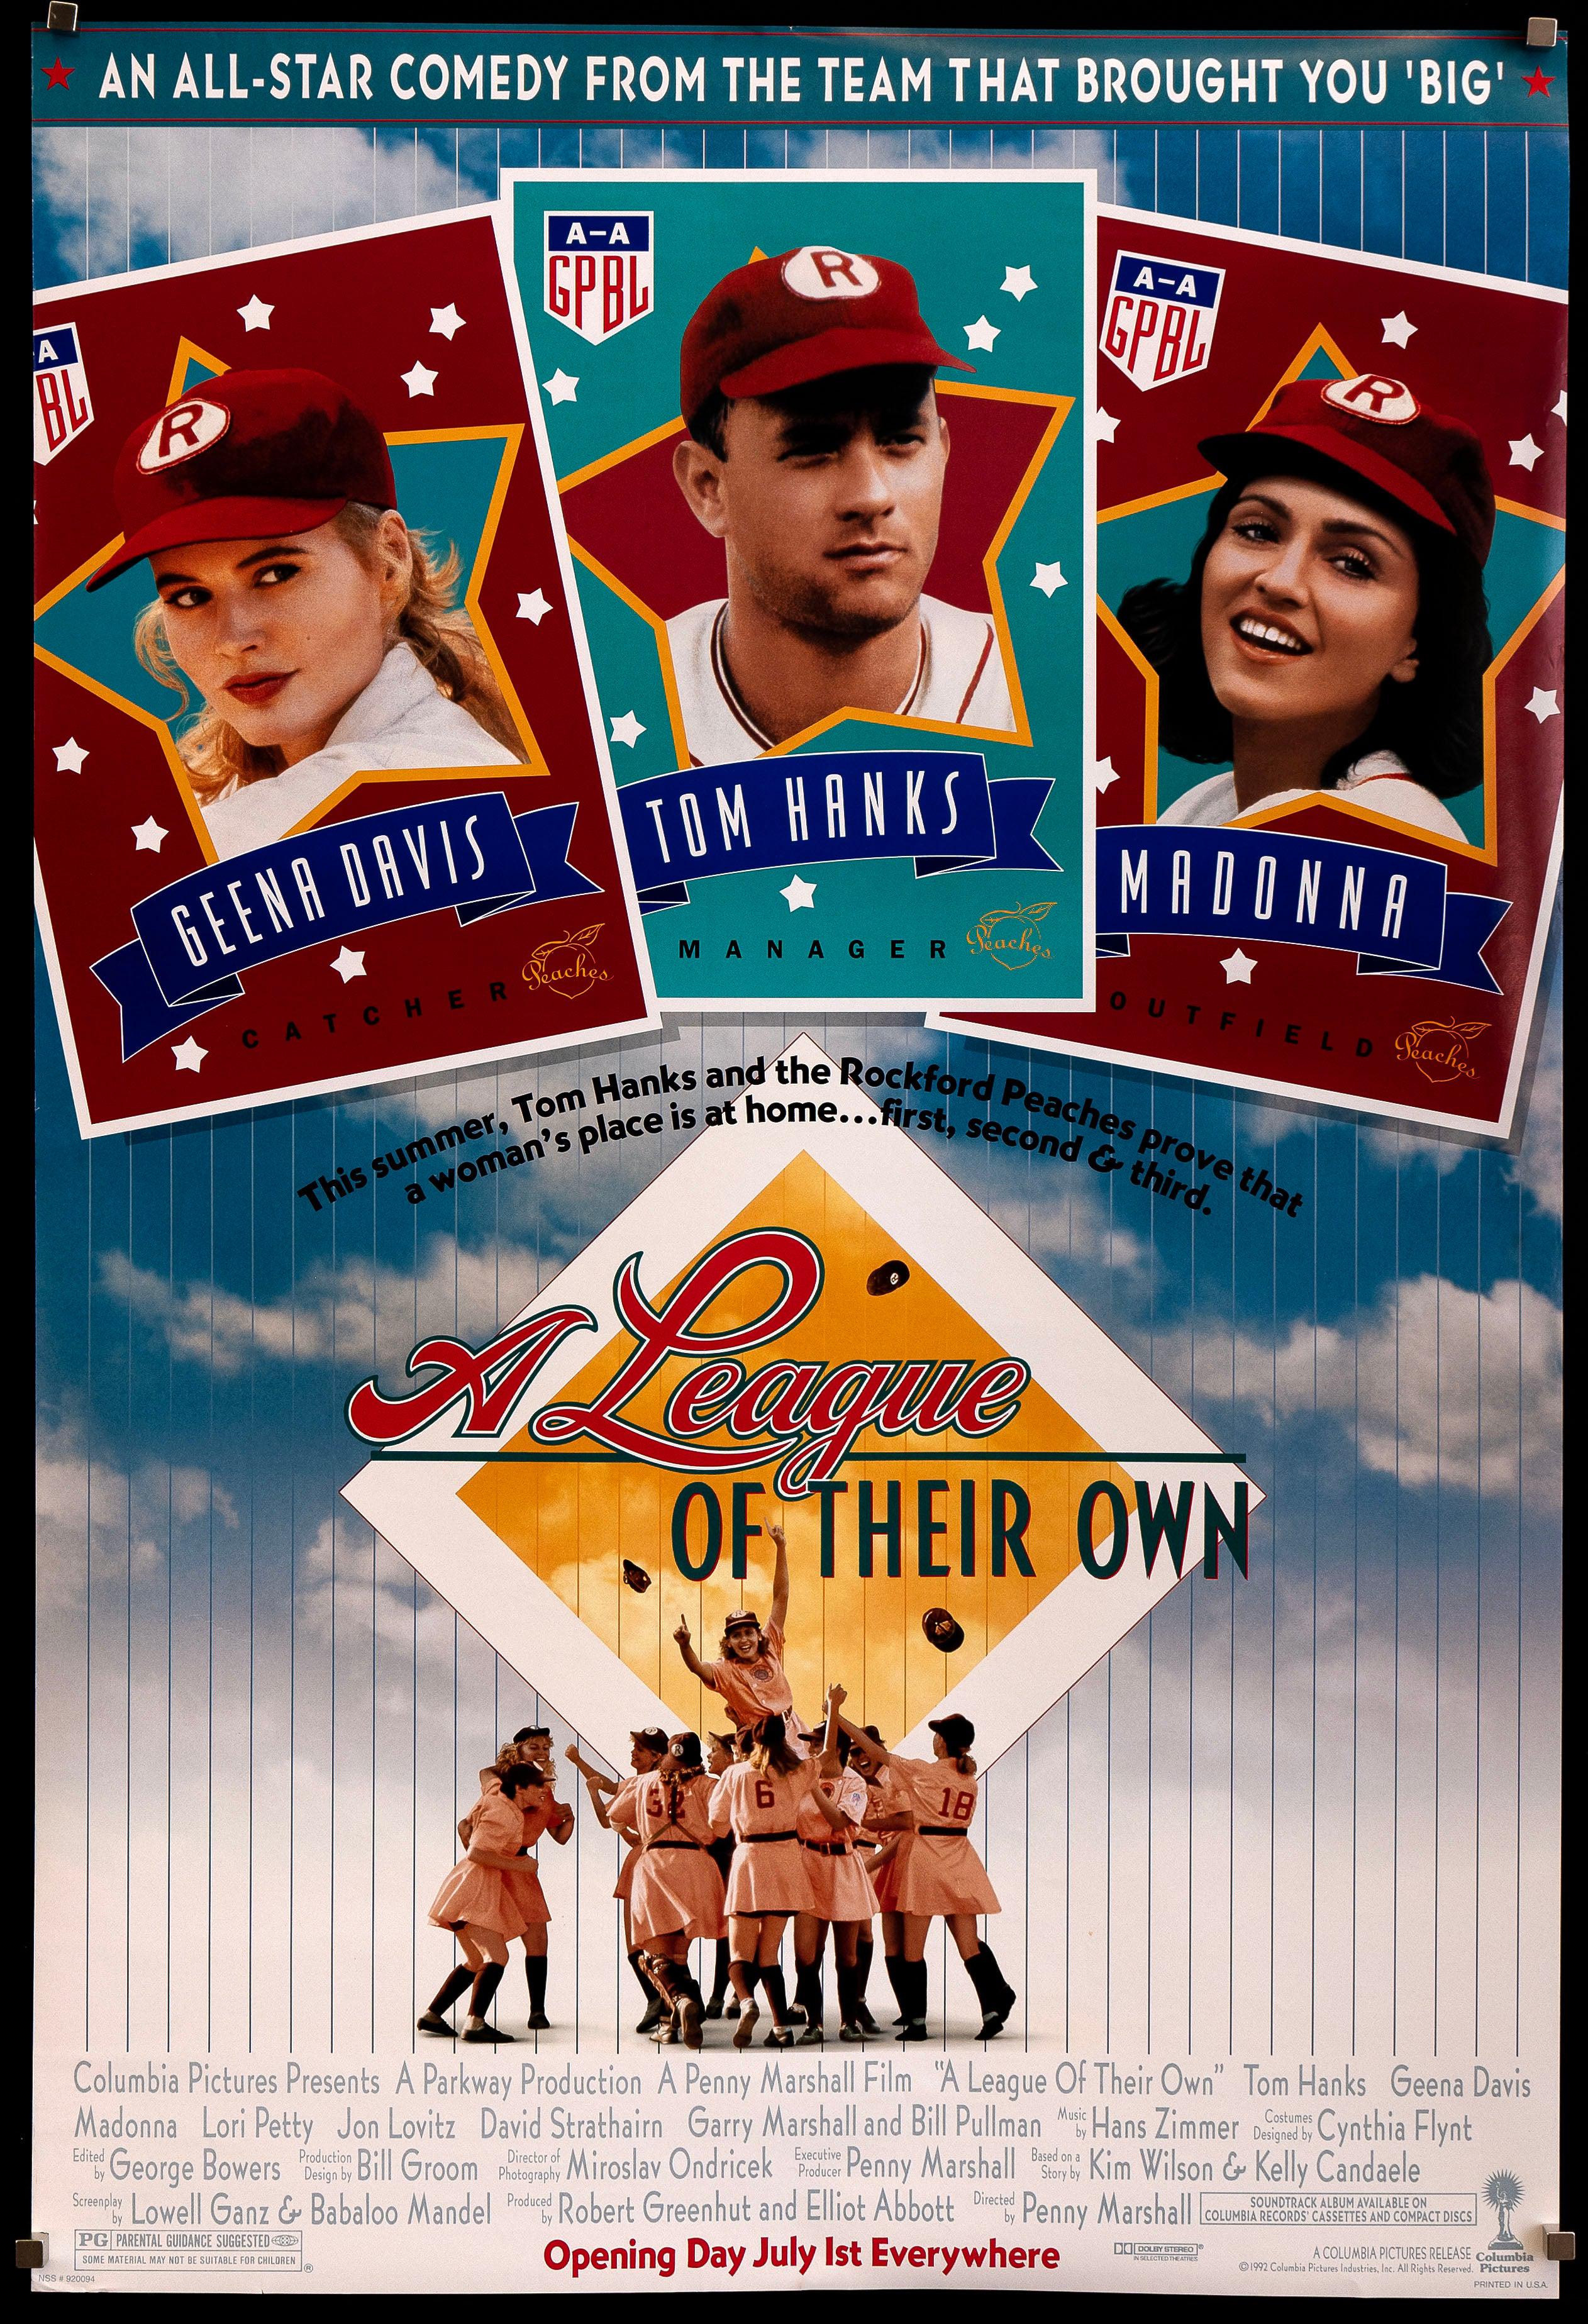 image of women in baseball uniforms on a baseball field with three baseball trading card s featuring the stars of the movie